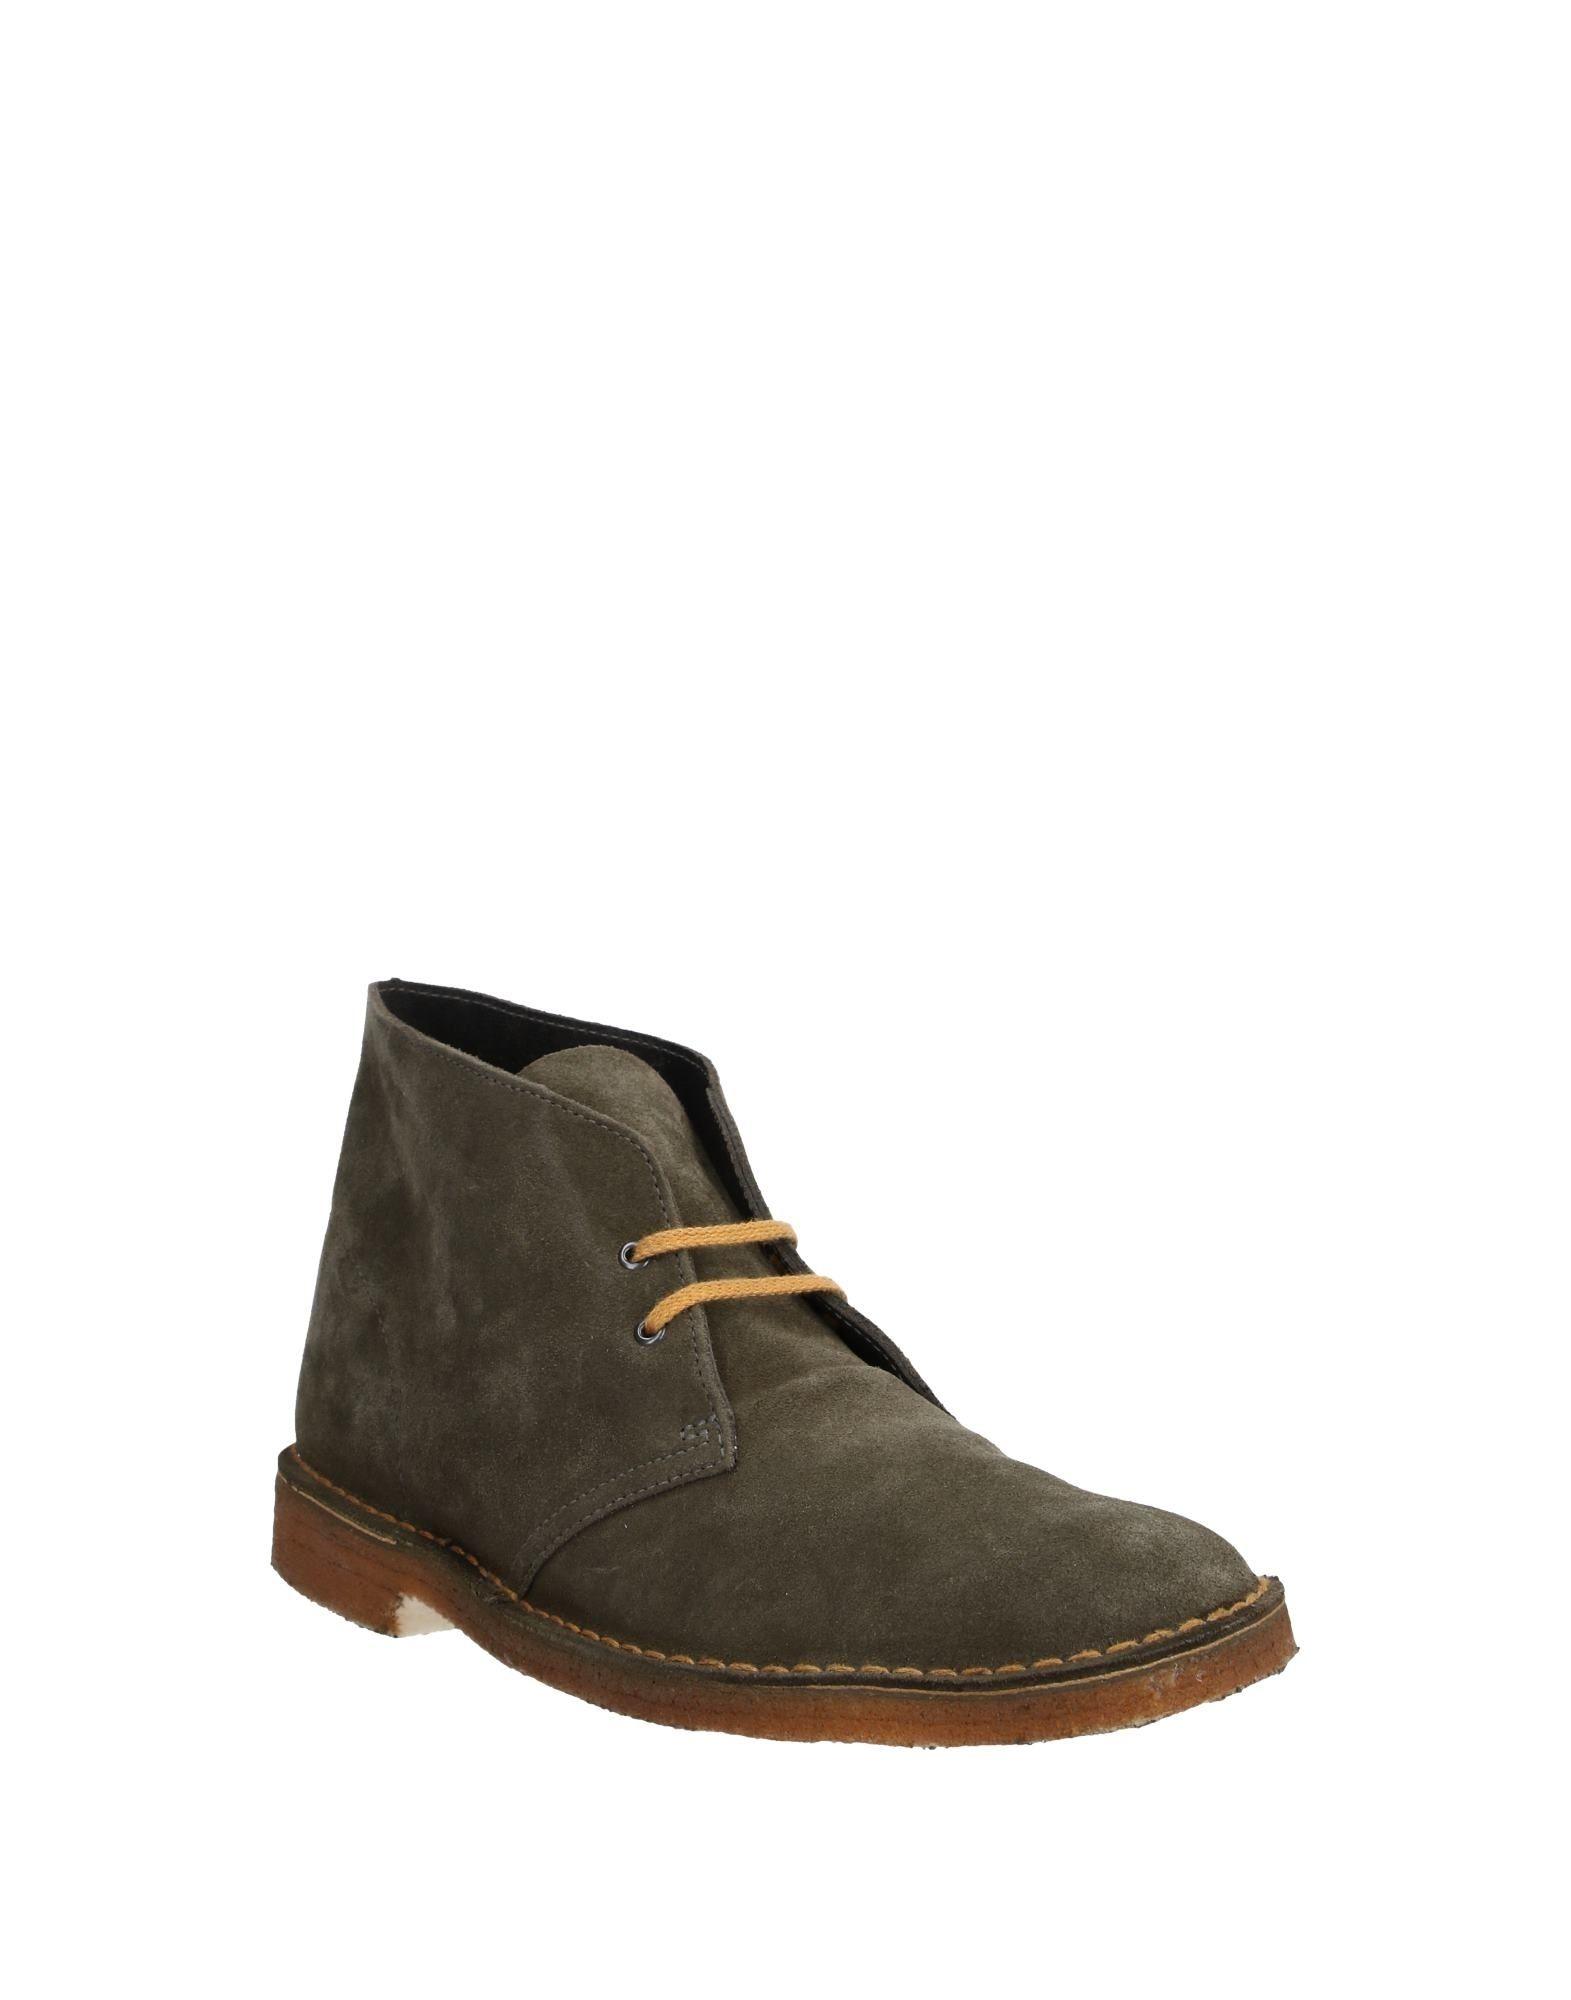 Clarks Leather Ankle Boots in Military Green (Green) for Men - Lyst